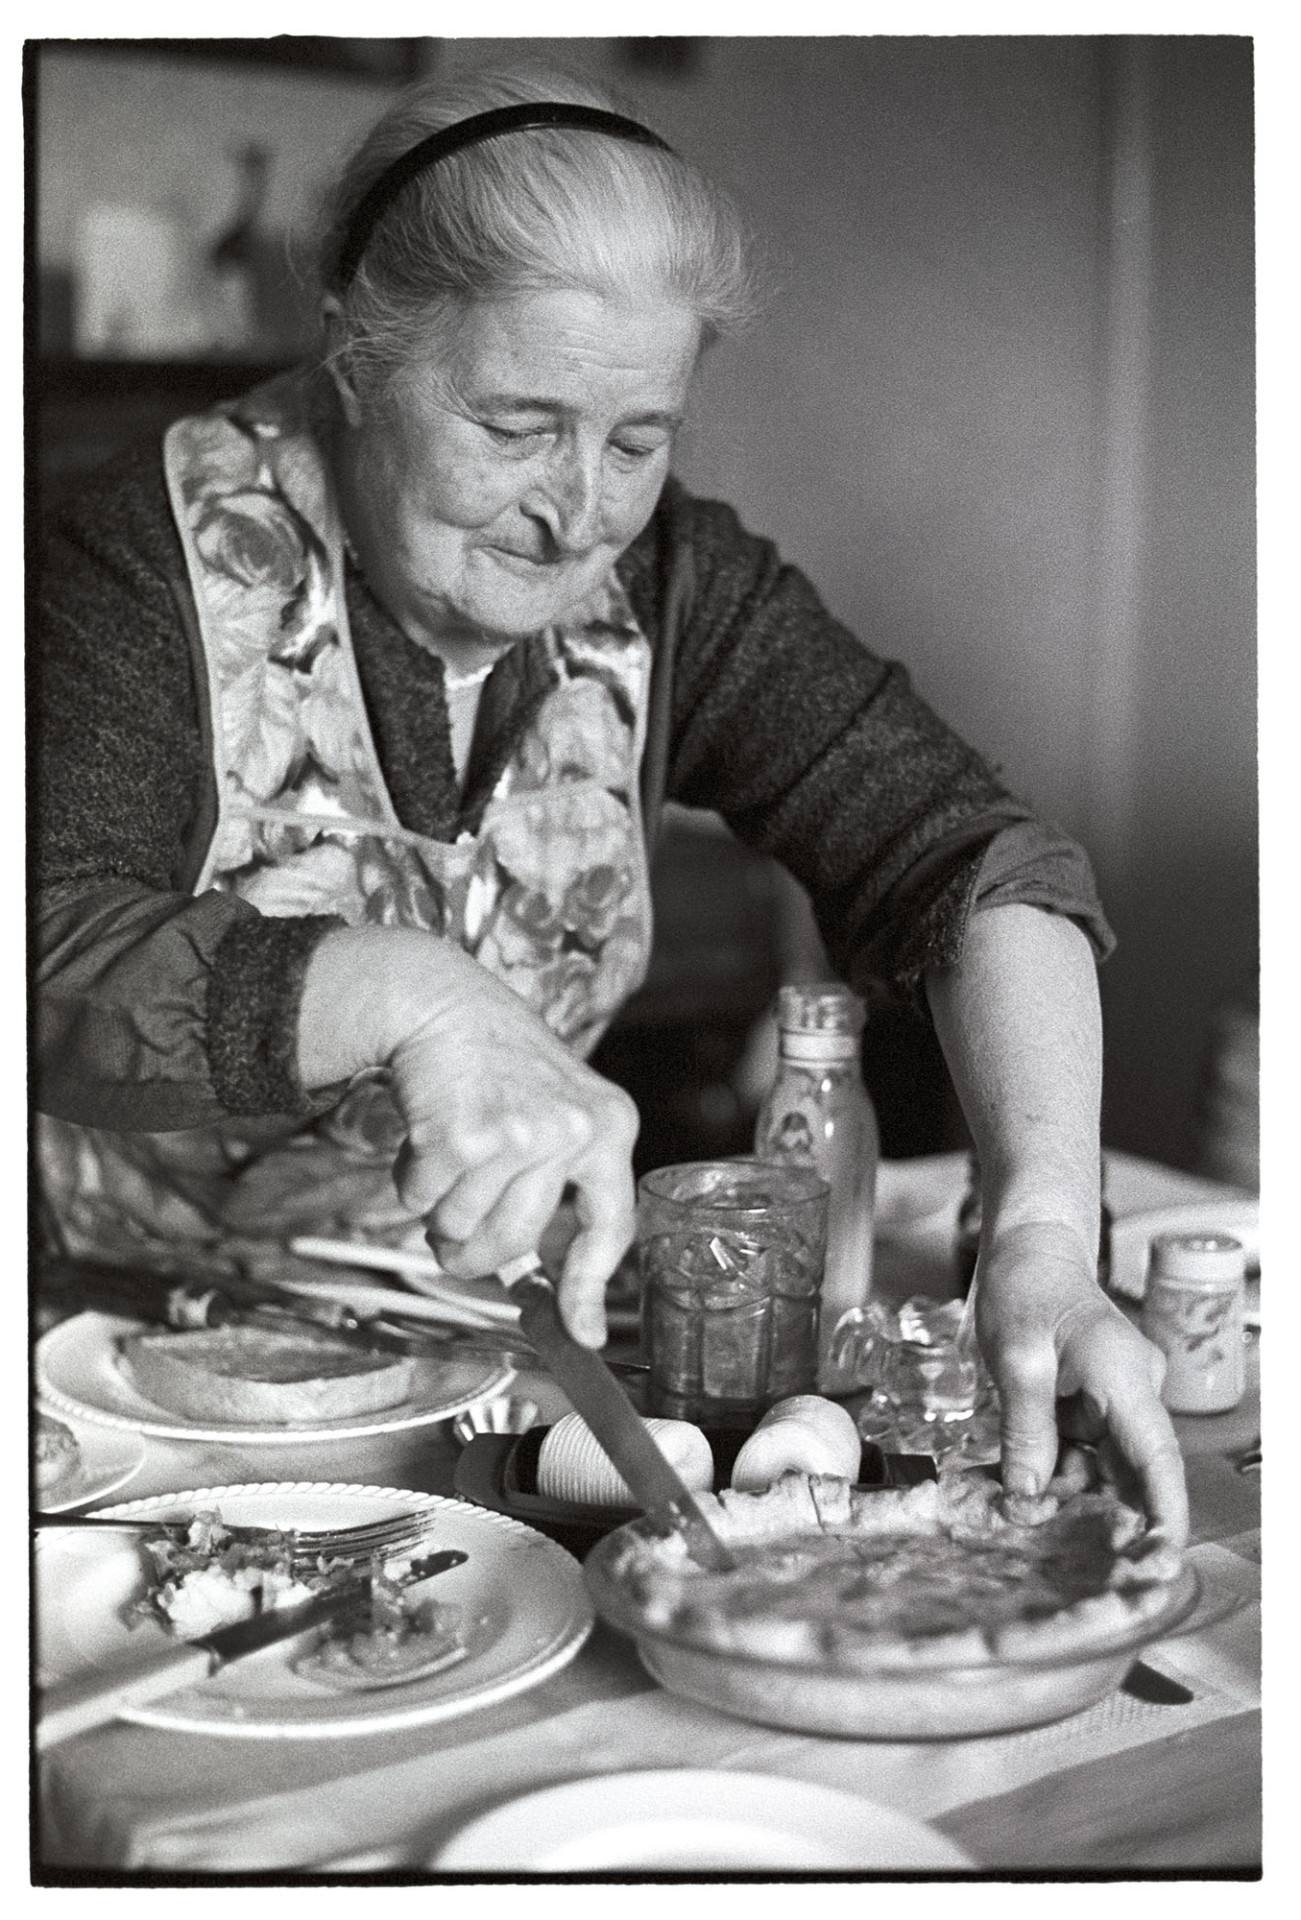 Woman cutting slice of home made pie.
[Norah Maynard cutting a slice of home made pie at her kitchen table in Atherington.